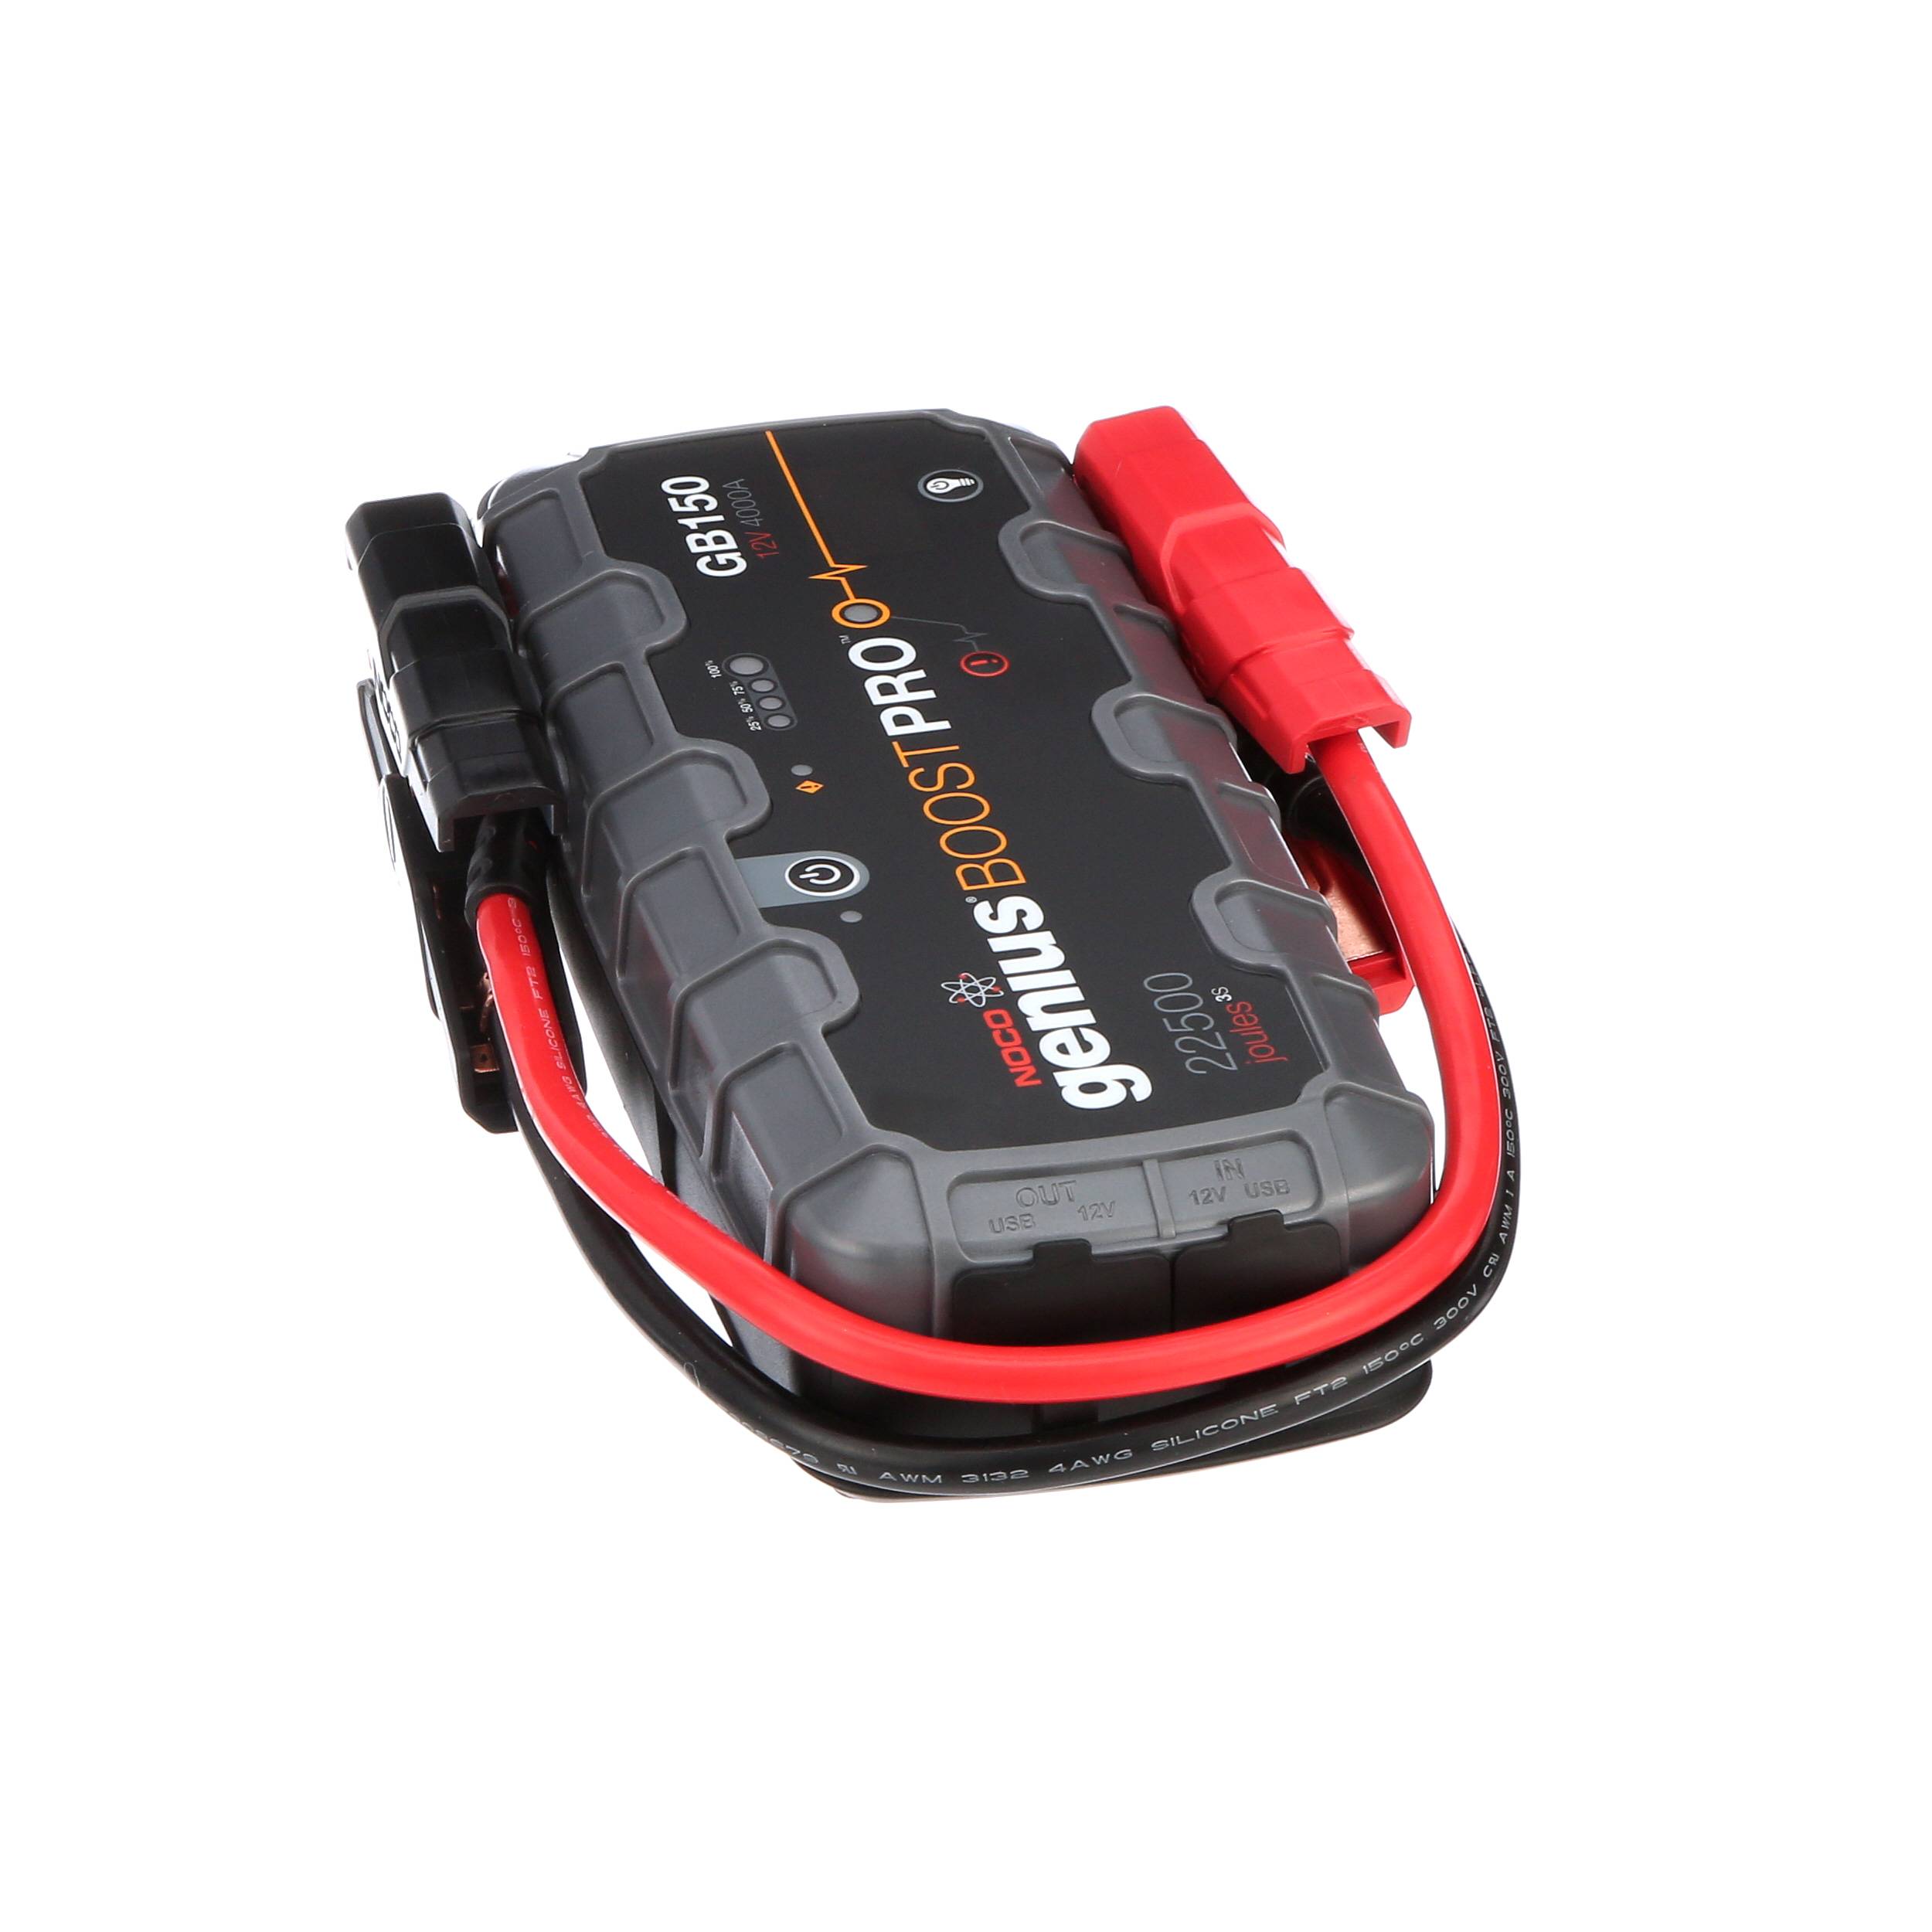 NOCO Boost PRO 3000A UltraSafe Lithium Jump Starter GB150